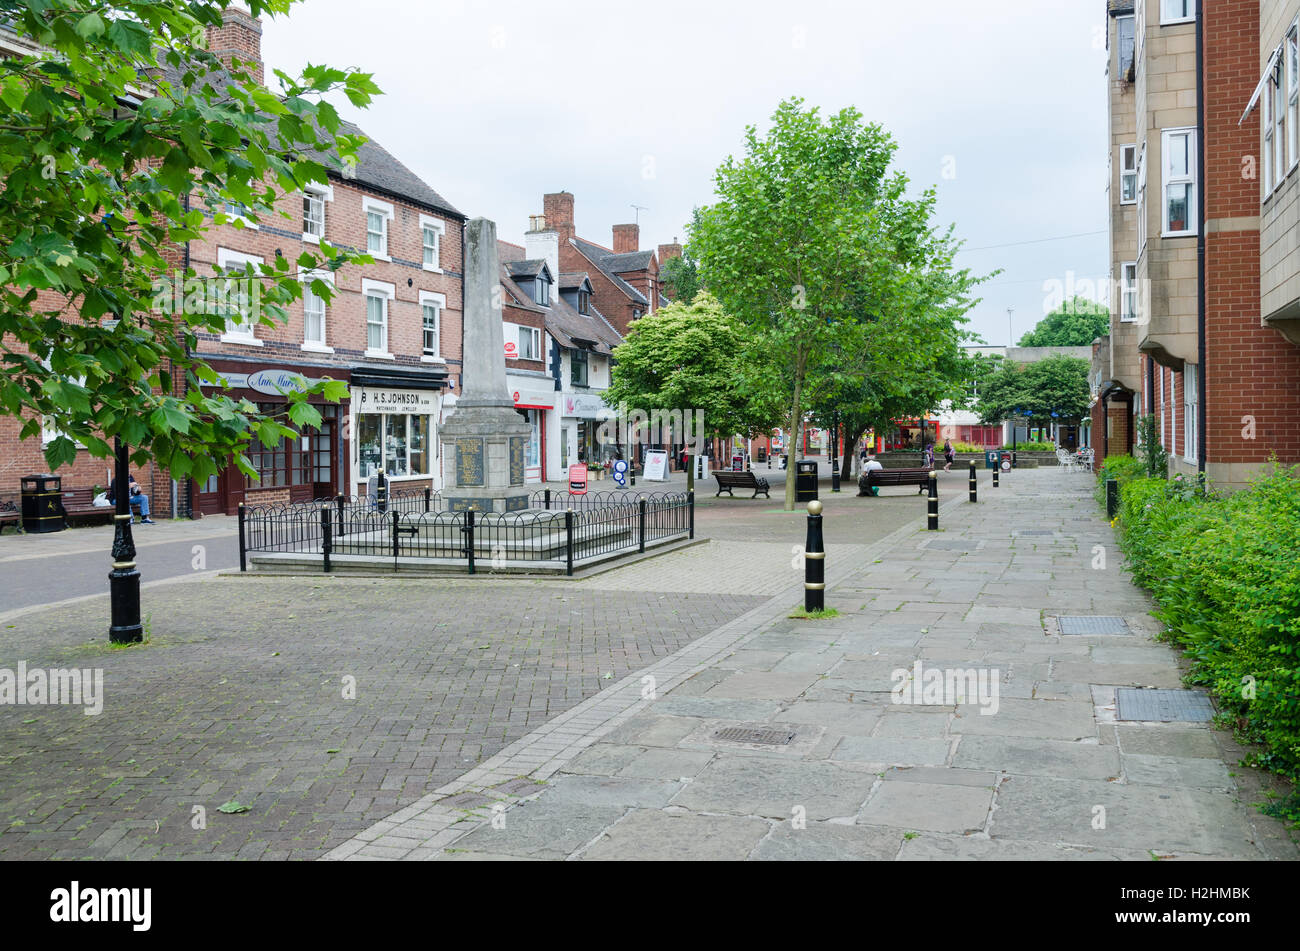 Anson Street in the Staffordshire town of Rugeley Stock Photo